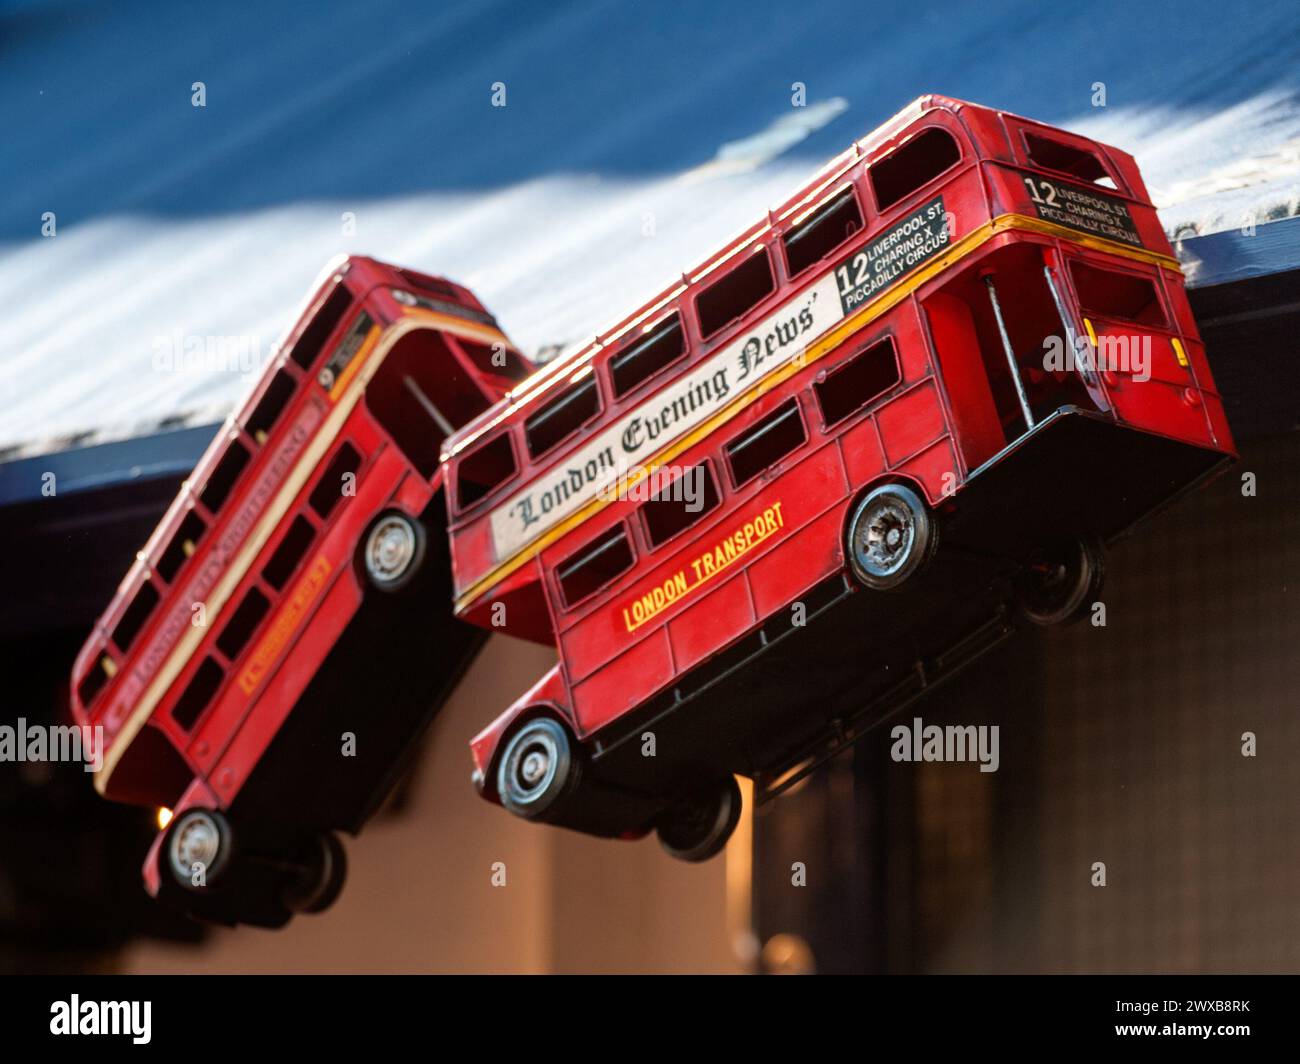 LONDON, UK - OCTOBER 01, 2011:  Souvenir toy Red Routemaster Buses on display at a Street Market Stock Photo